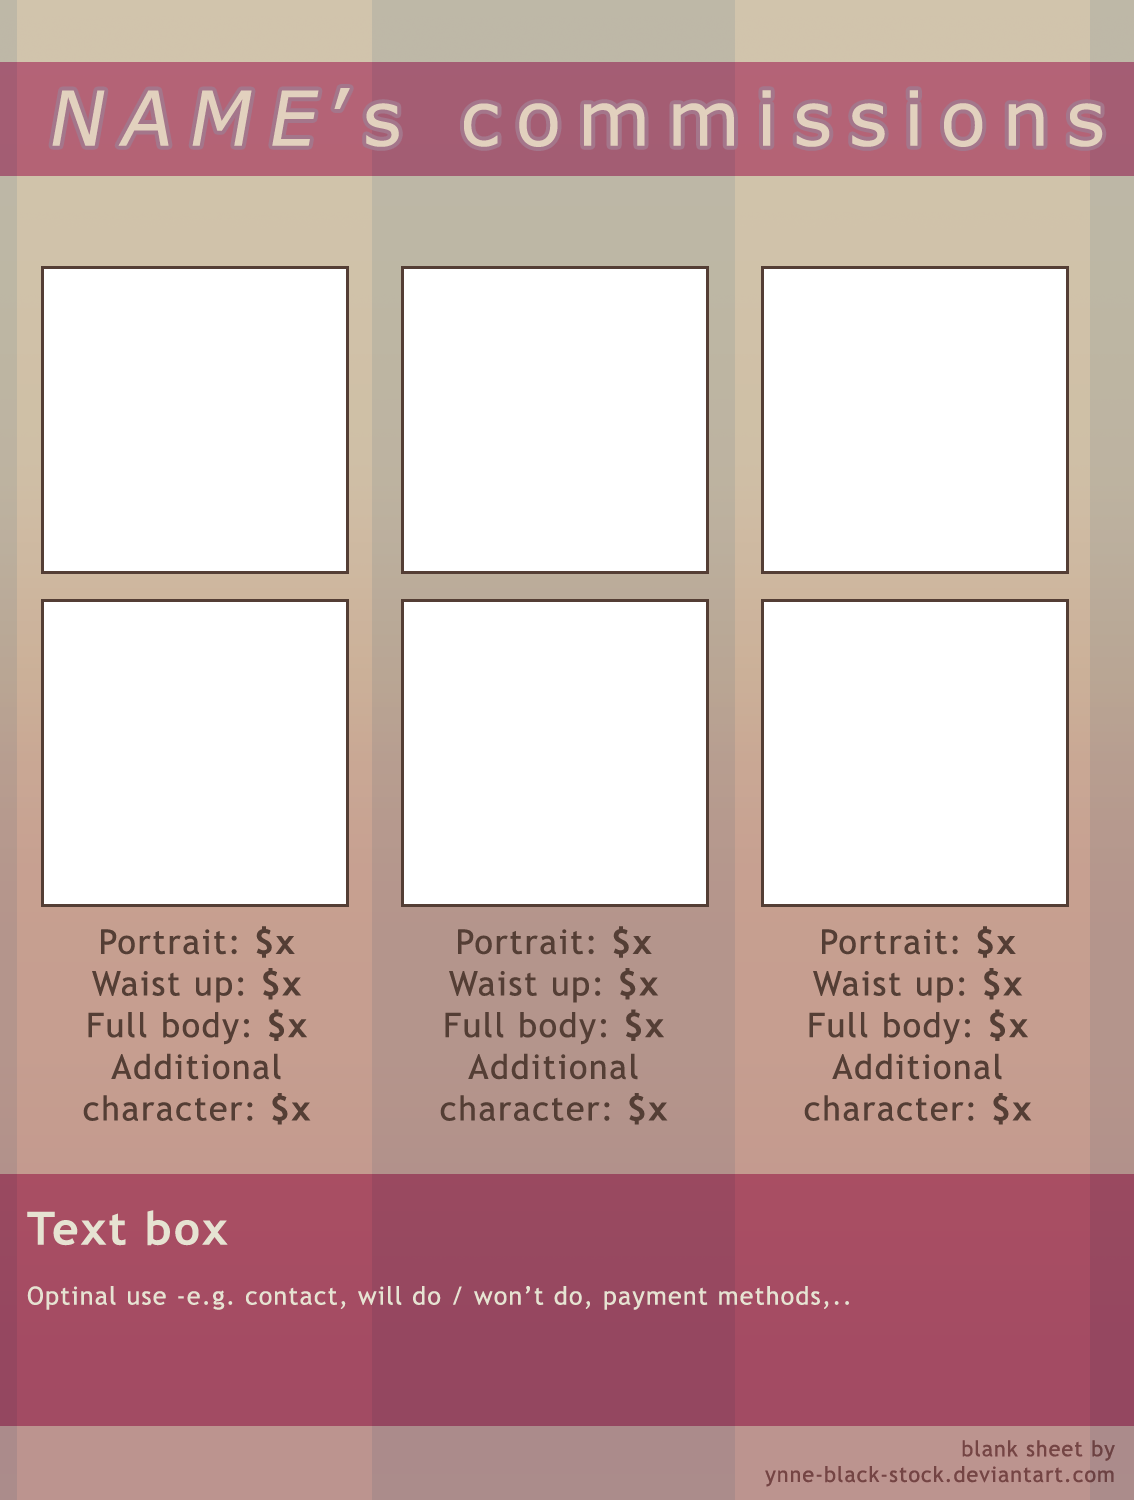 Edited Commission Sheet Psd Template By Ynne Black Stock On Deviantart